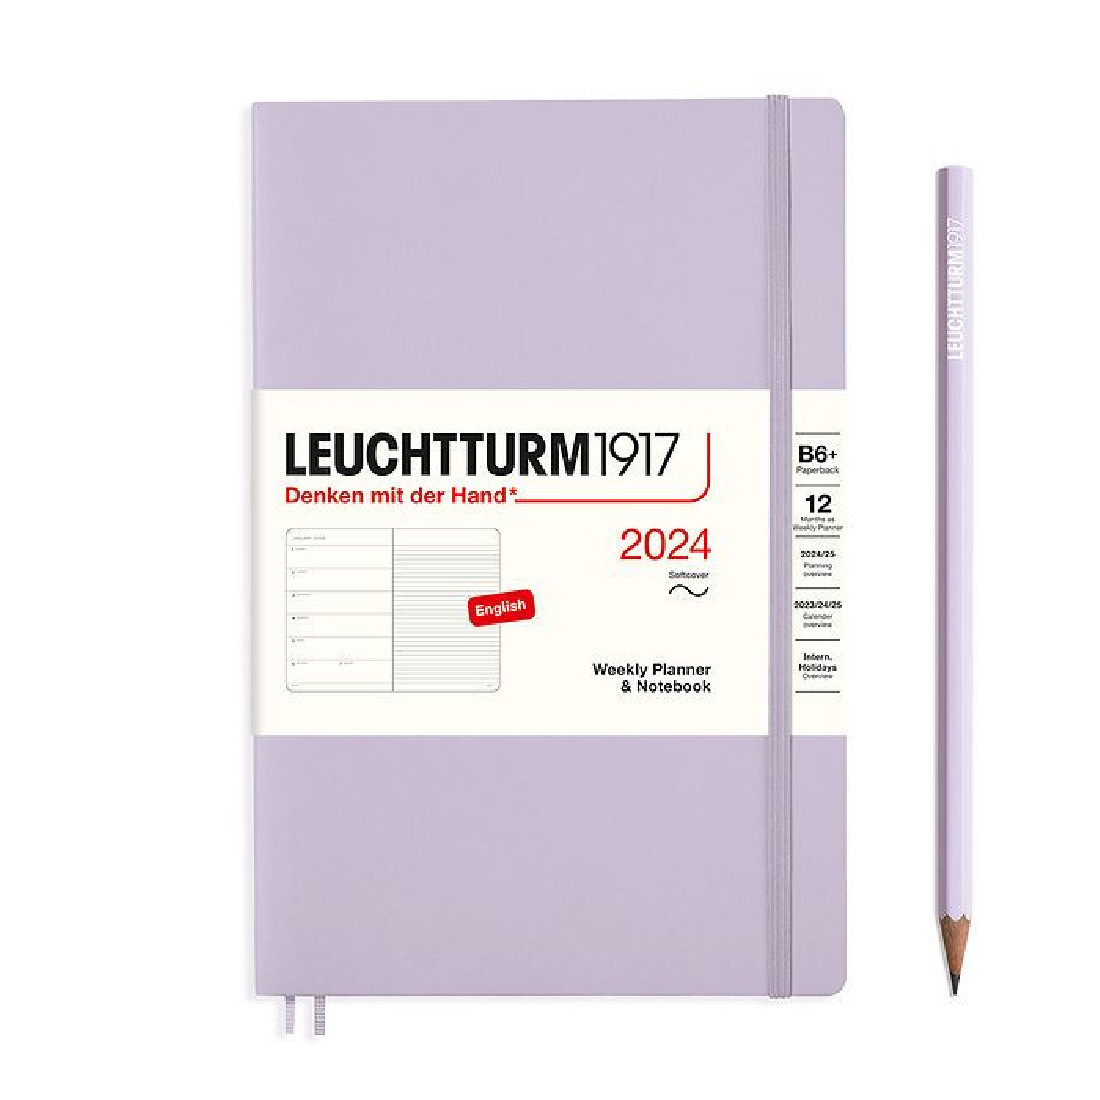 Leuchtturm 1917 Weekly Planner and Notebook 2024 Lilac Paperback B6 Plus Soft Cover